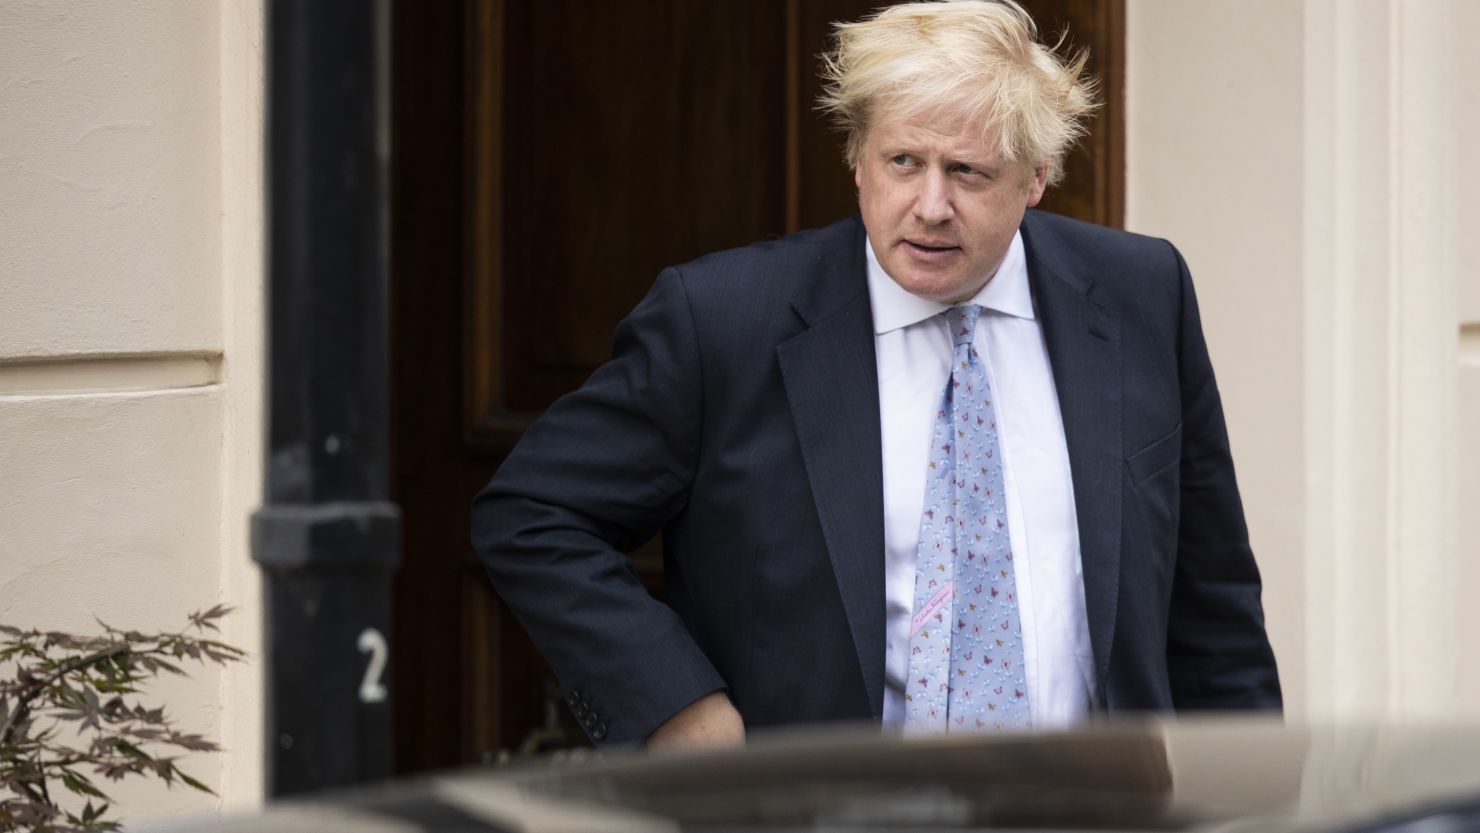 Former British Foreign Secretary Boris Johnson has been widely criticized for Islamophobic comments about women who choose to wear the burqa.